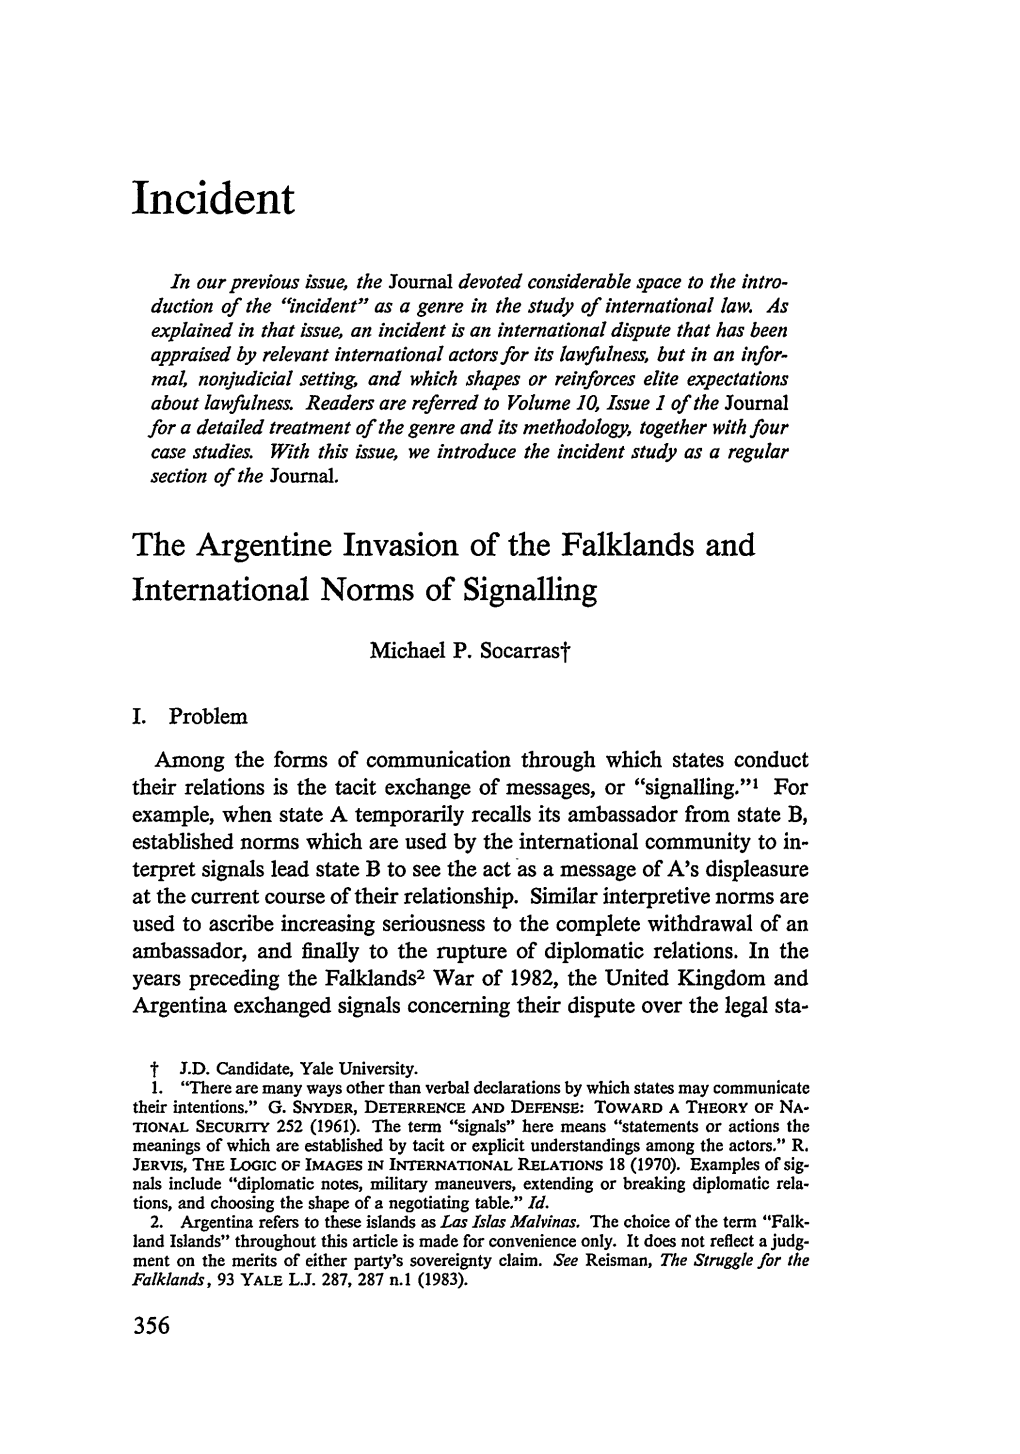 The Argentine Invasion of the Falklands and International Norms of Signalling